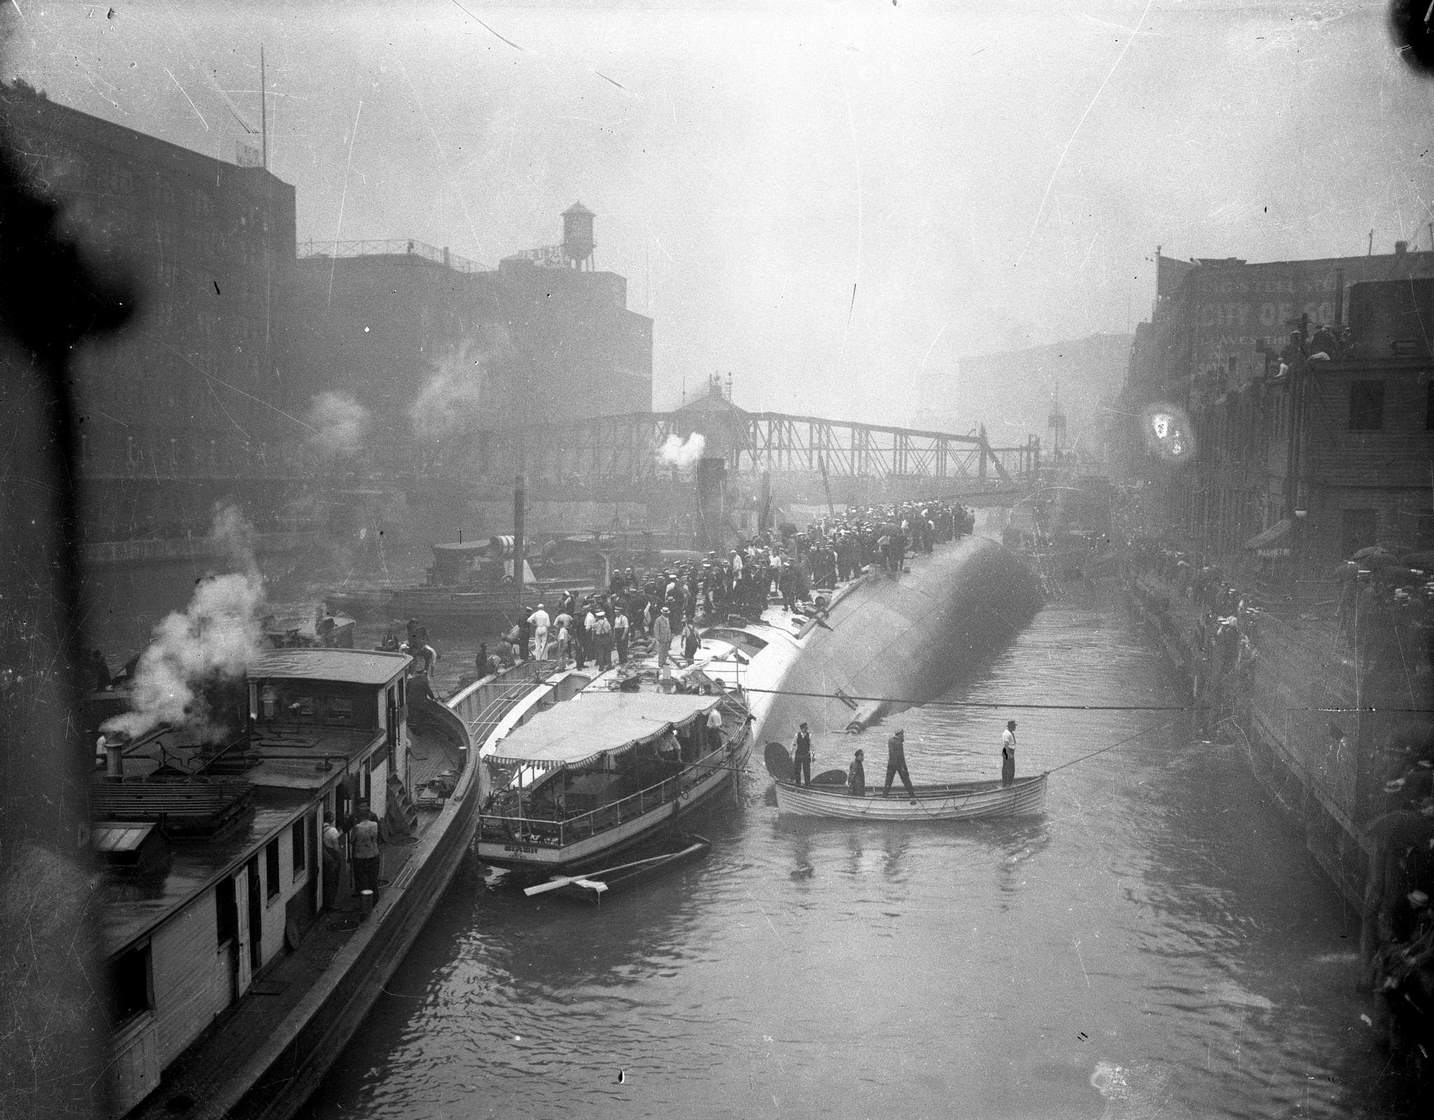 The S.S. Eastland lying on its side in the Chicago River after slowly rolling over and drowning 844 people on July 24, 1915 in Chicago.